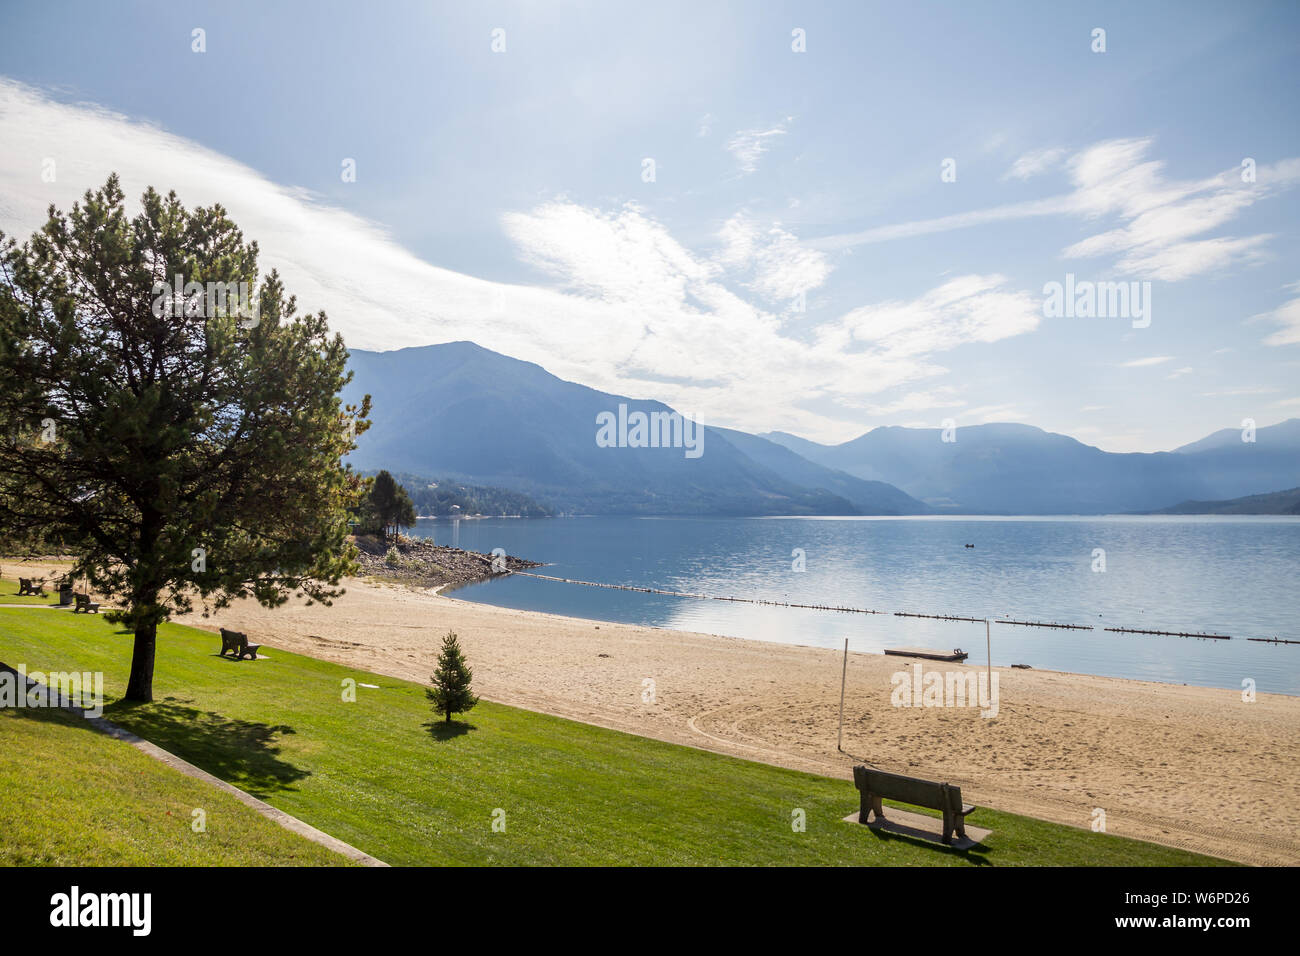 Upper Arrow Lake - part of the Columbia River - and surrounding mountains from Nakusp beach in the West Kootenay region of British Columbia, Canada Stock Photo